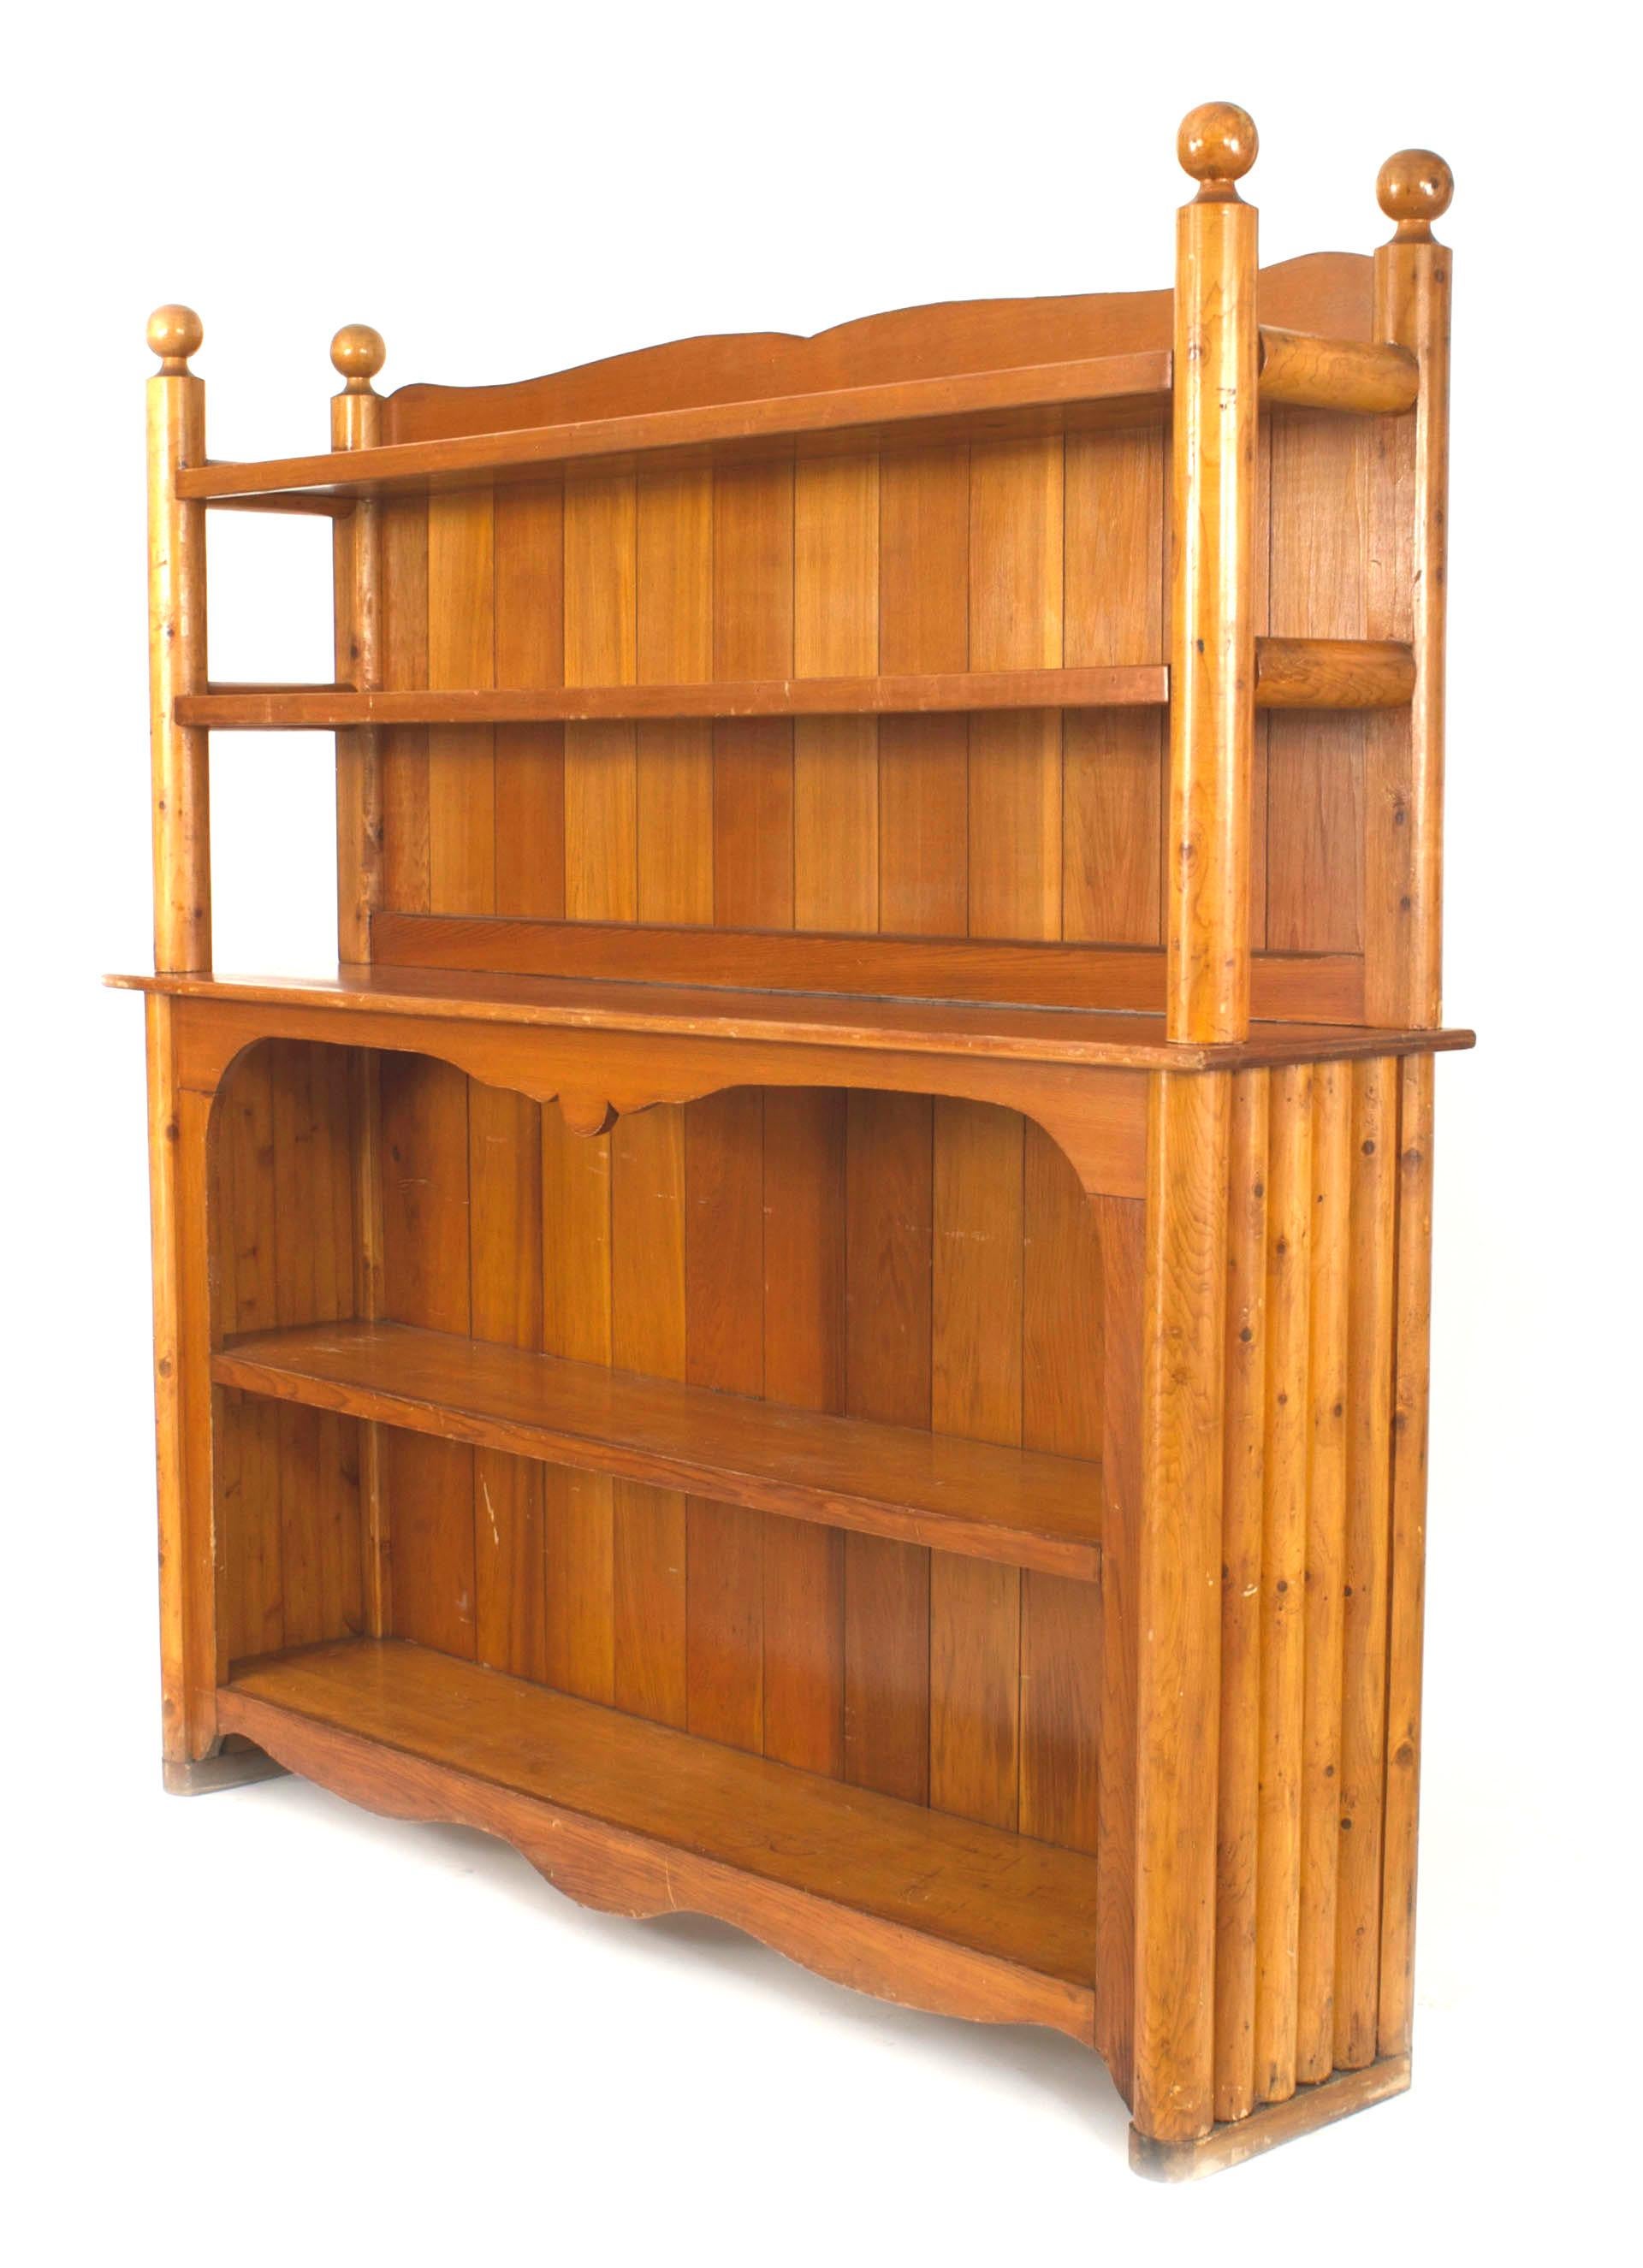 American Old Hickory-style (1950s) cedar 2 section back bar cabinet having 2 top & bottom shelves. (RITTENHOUSE) (Related items: 060874, 060876, 060874A)
